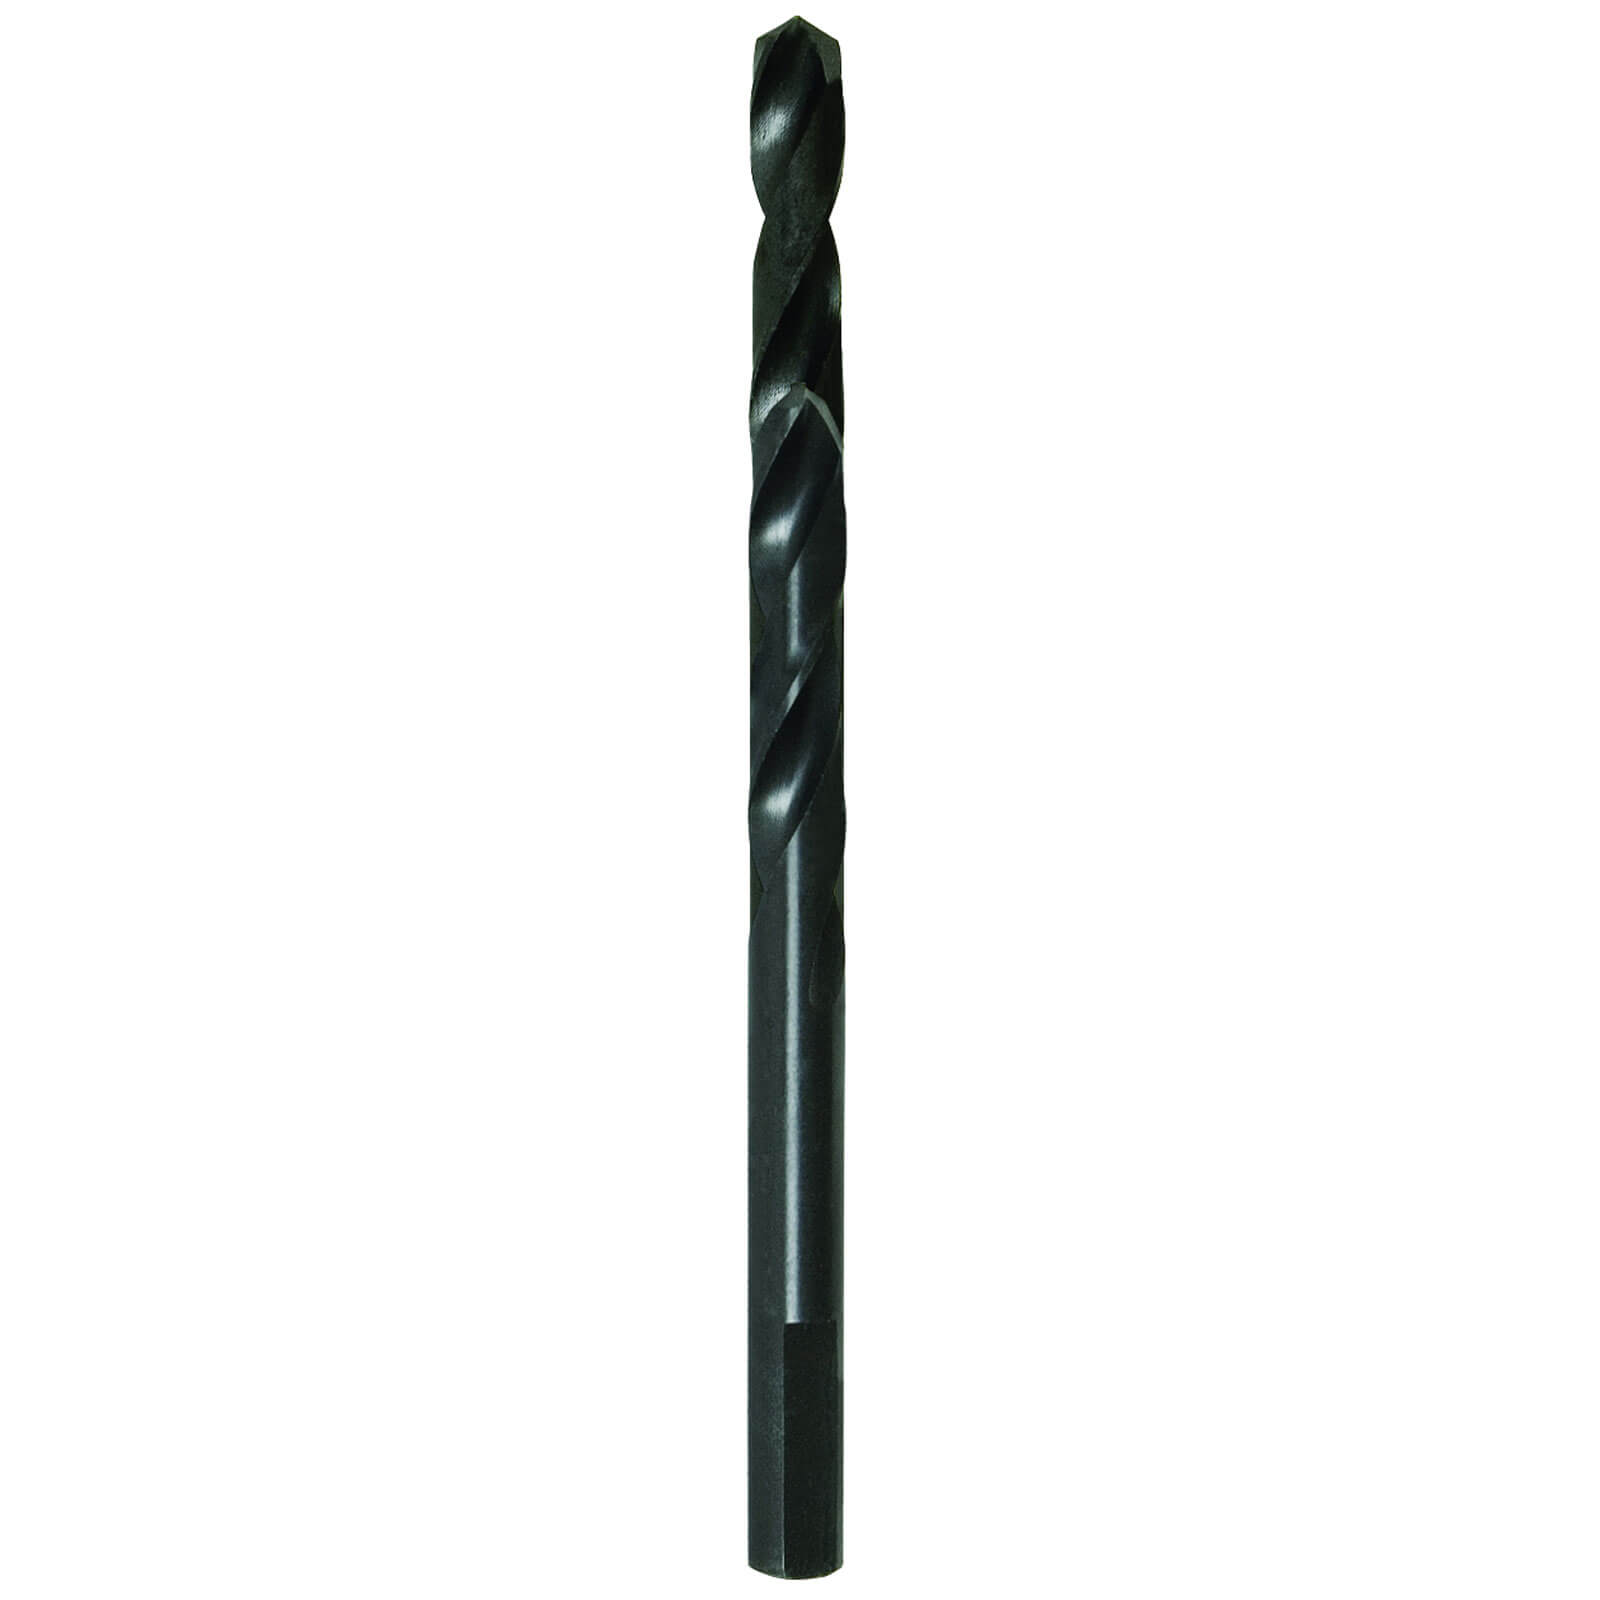 Image of Lenox Pilot Drill Bit for 1L and 4L Hole Saw Arbors